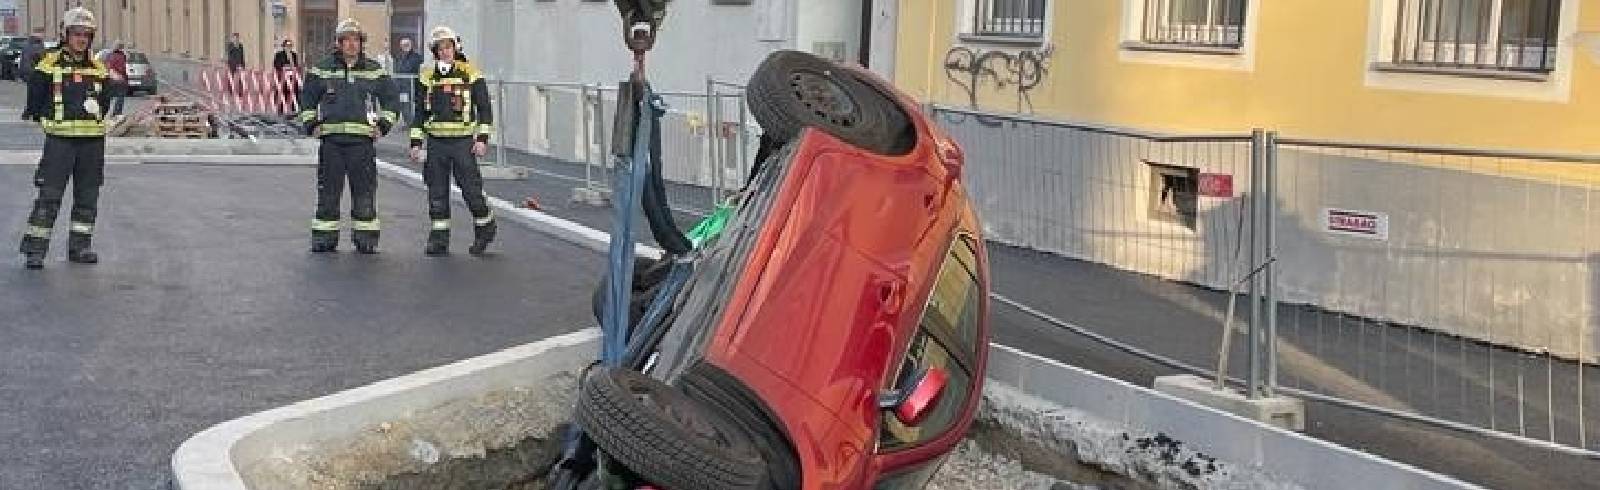 Unfall: Auto steckt in Baugrube